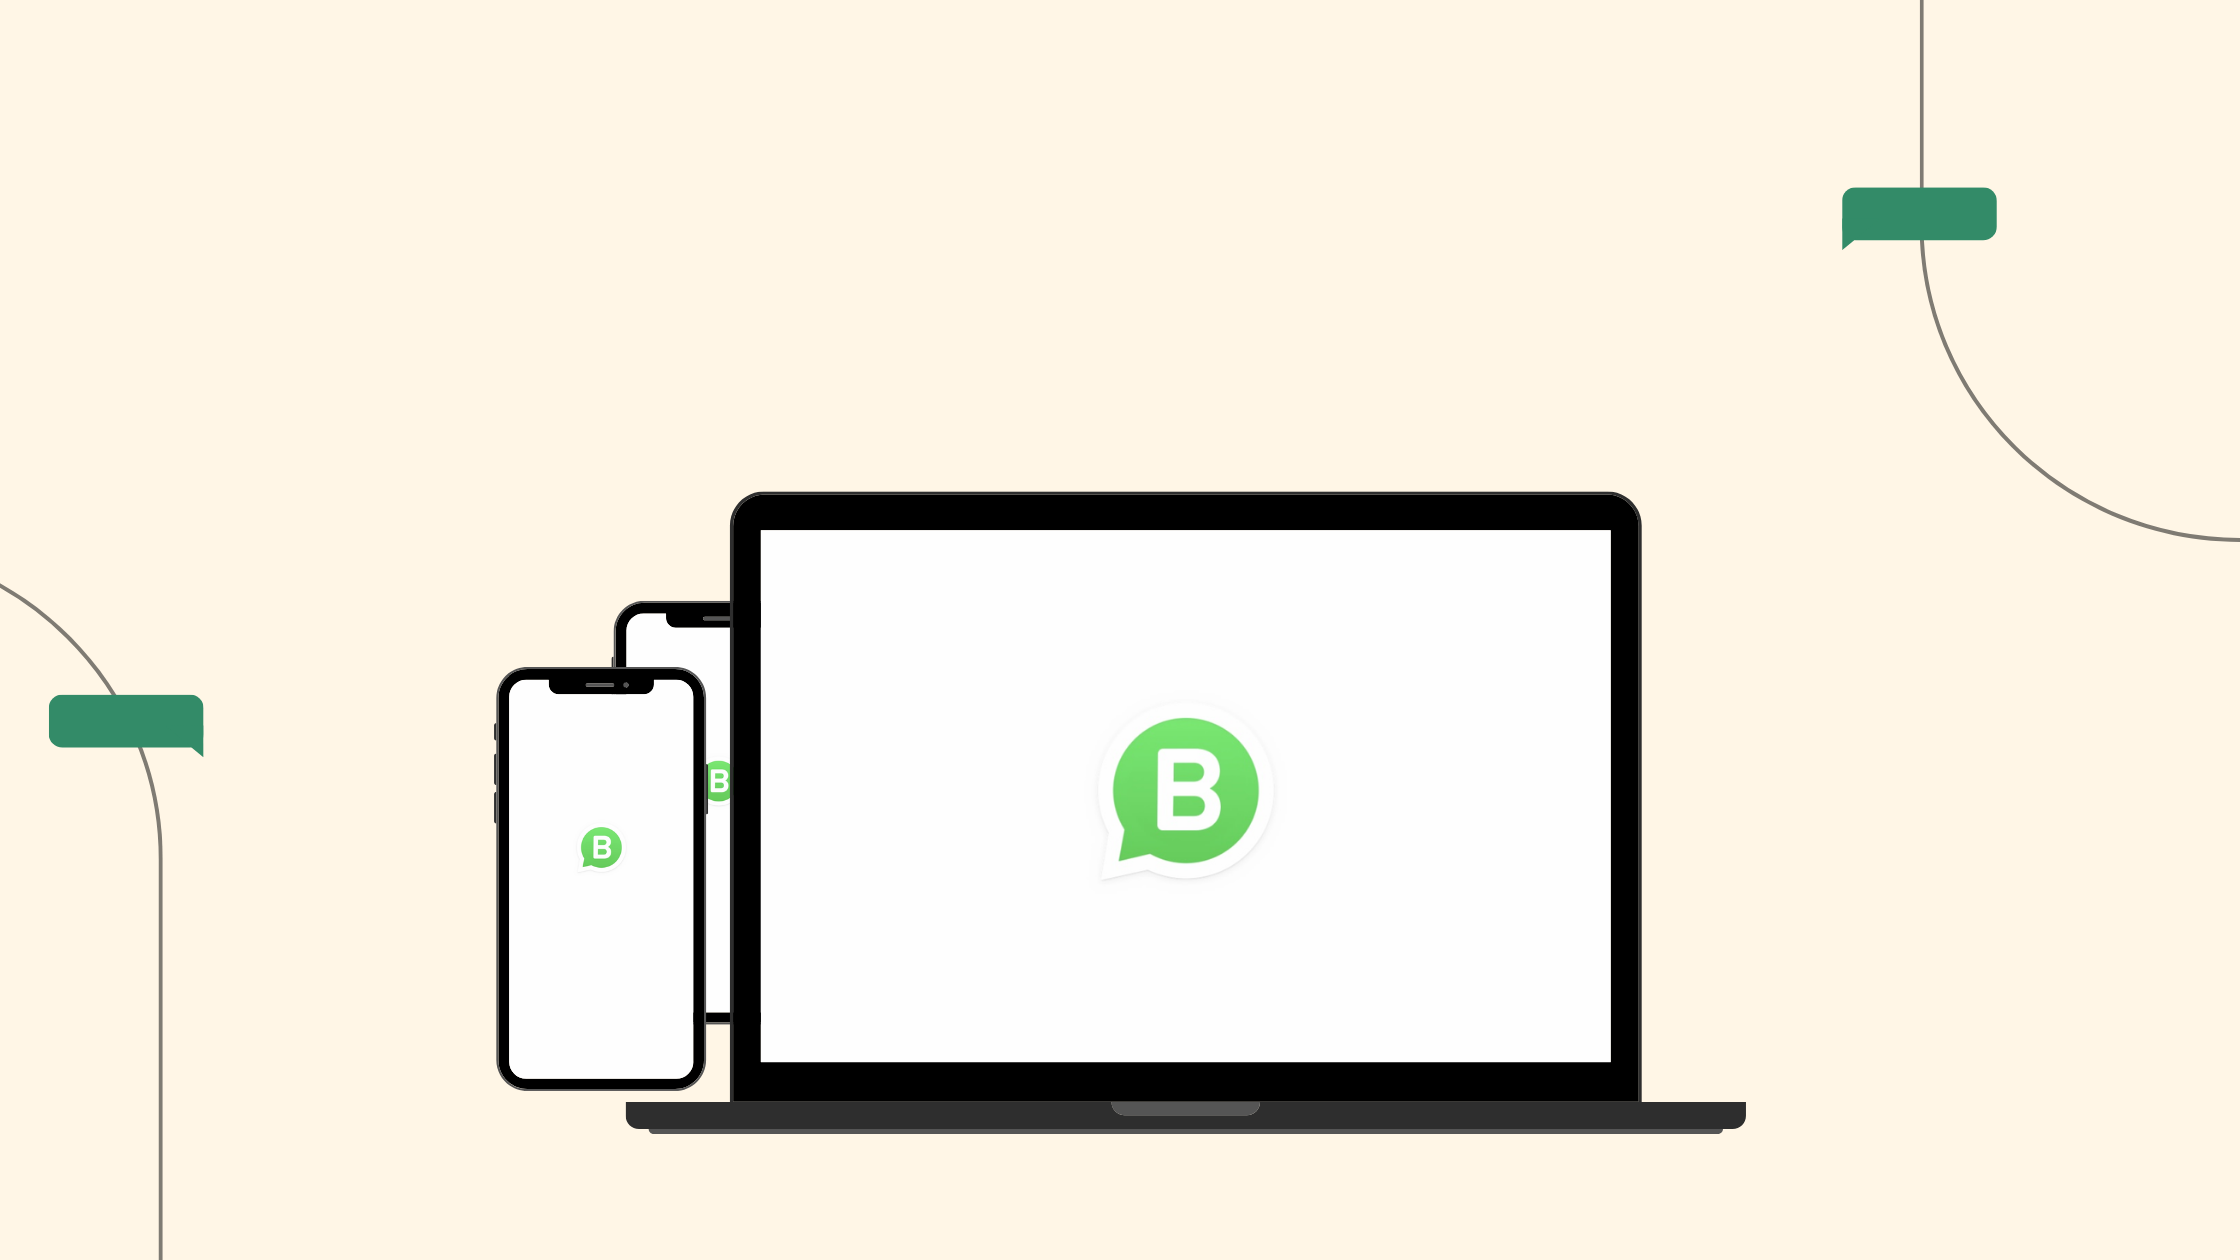 Graphic of a laptop and two smartphones next to it on a beige background. All displaying the WhatsApp Business logo.